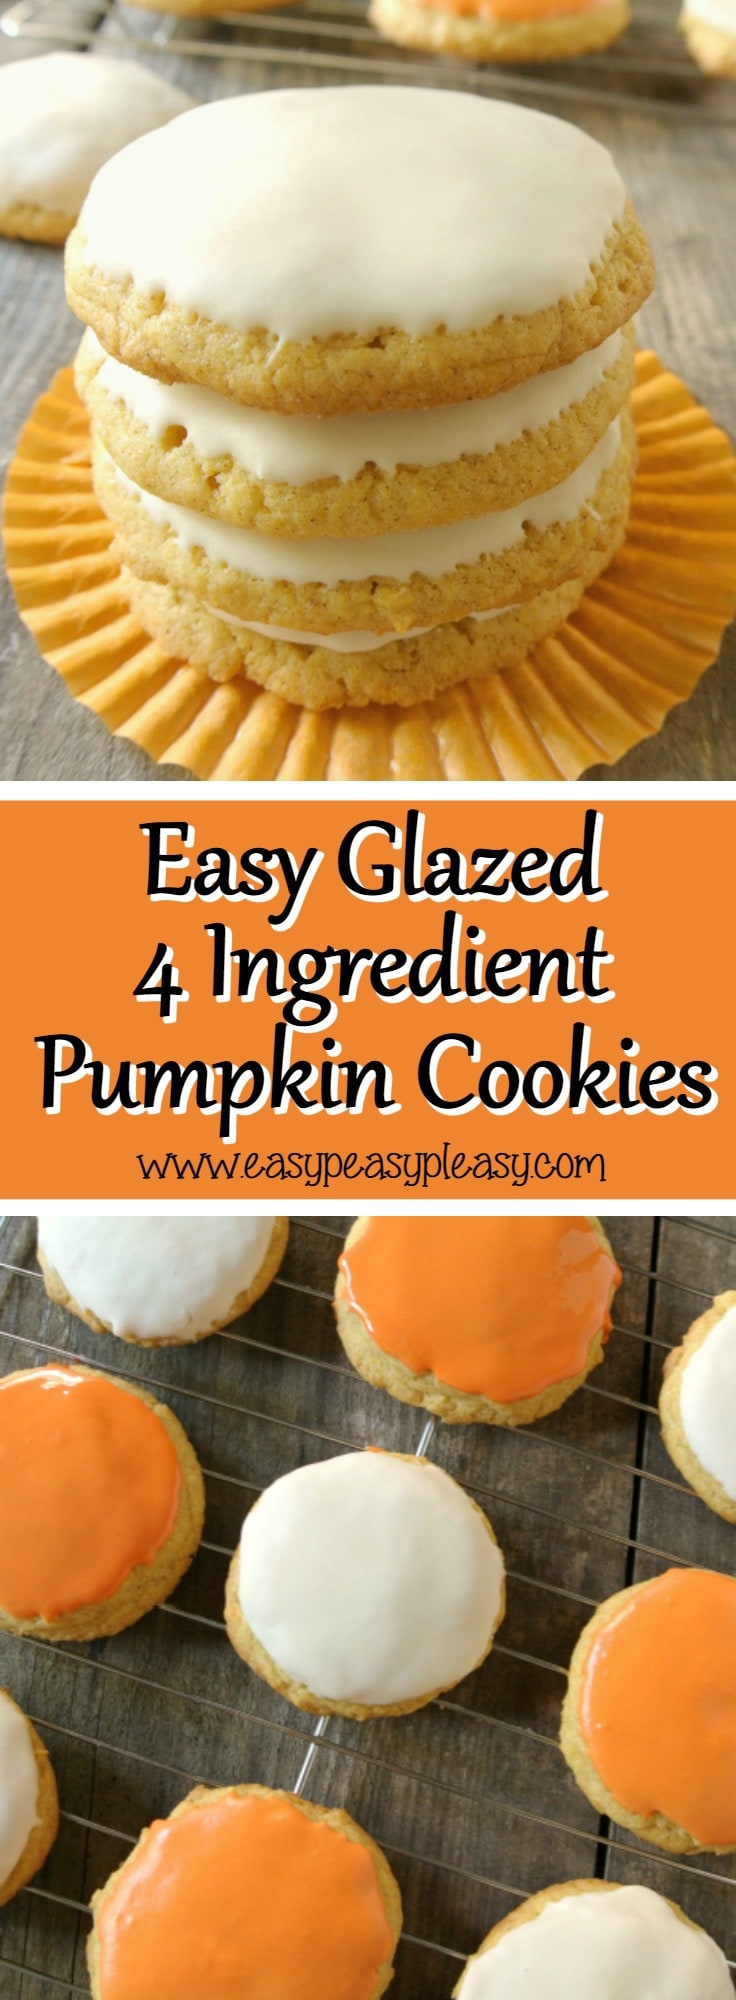 Make cookies from a box of cake mix and use store bought frosting to make a glaze with these easy glazed 4 Ingredient Pumpkin Cookies.